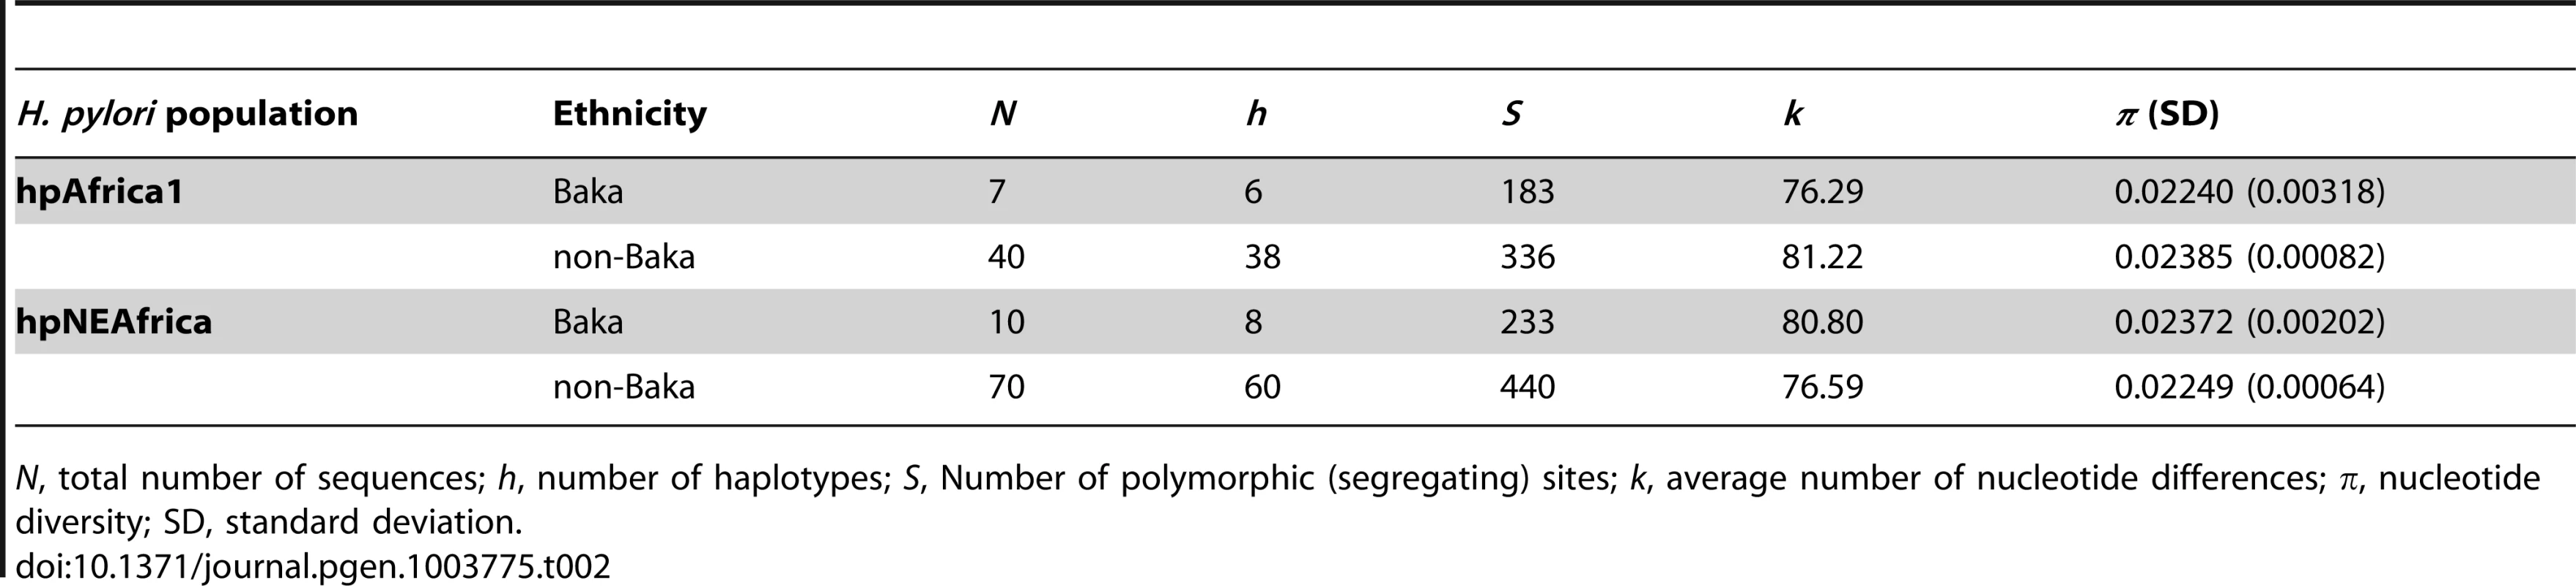 Genetic diversity of hpAfrica1 and hpNEAfrica haplotypes isolated from Baka Pygmies and non-Baka agriculturalists.